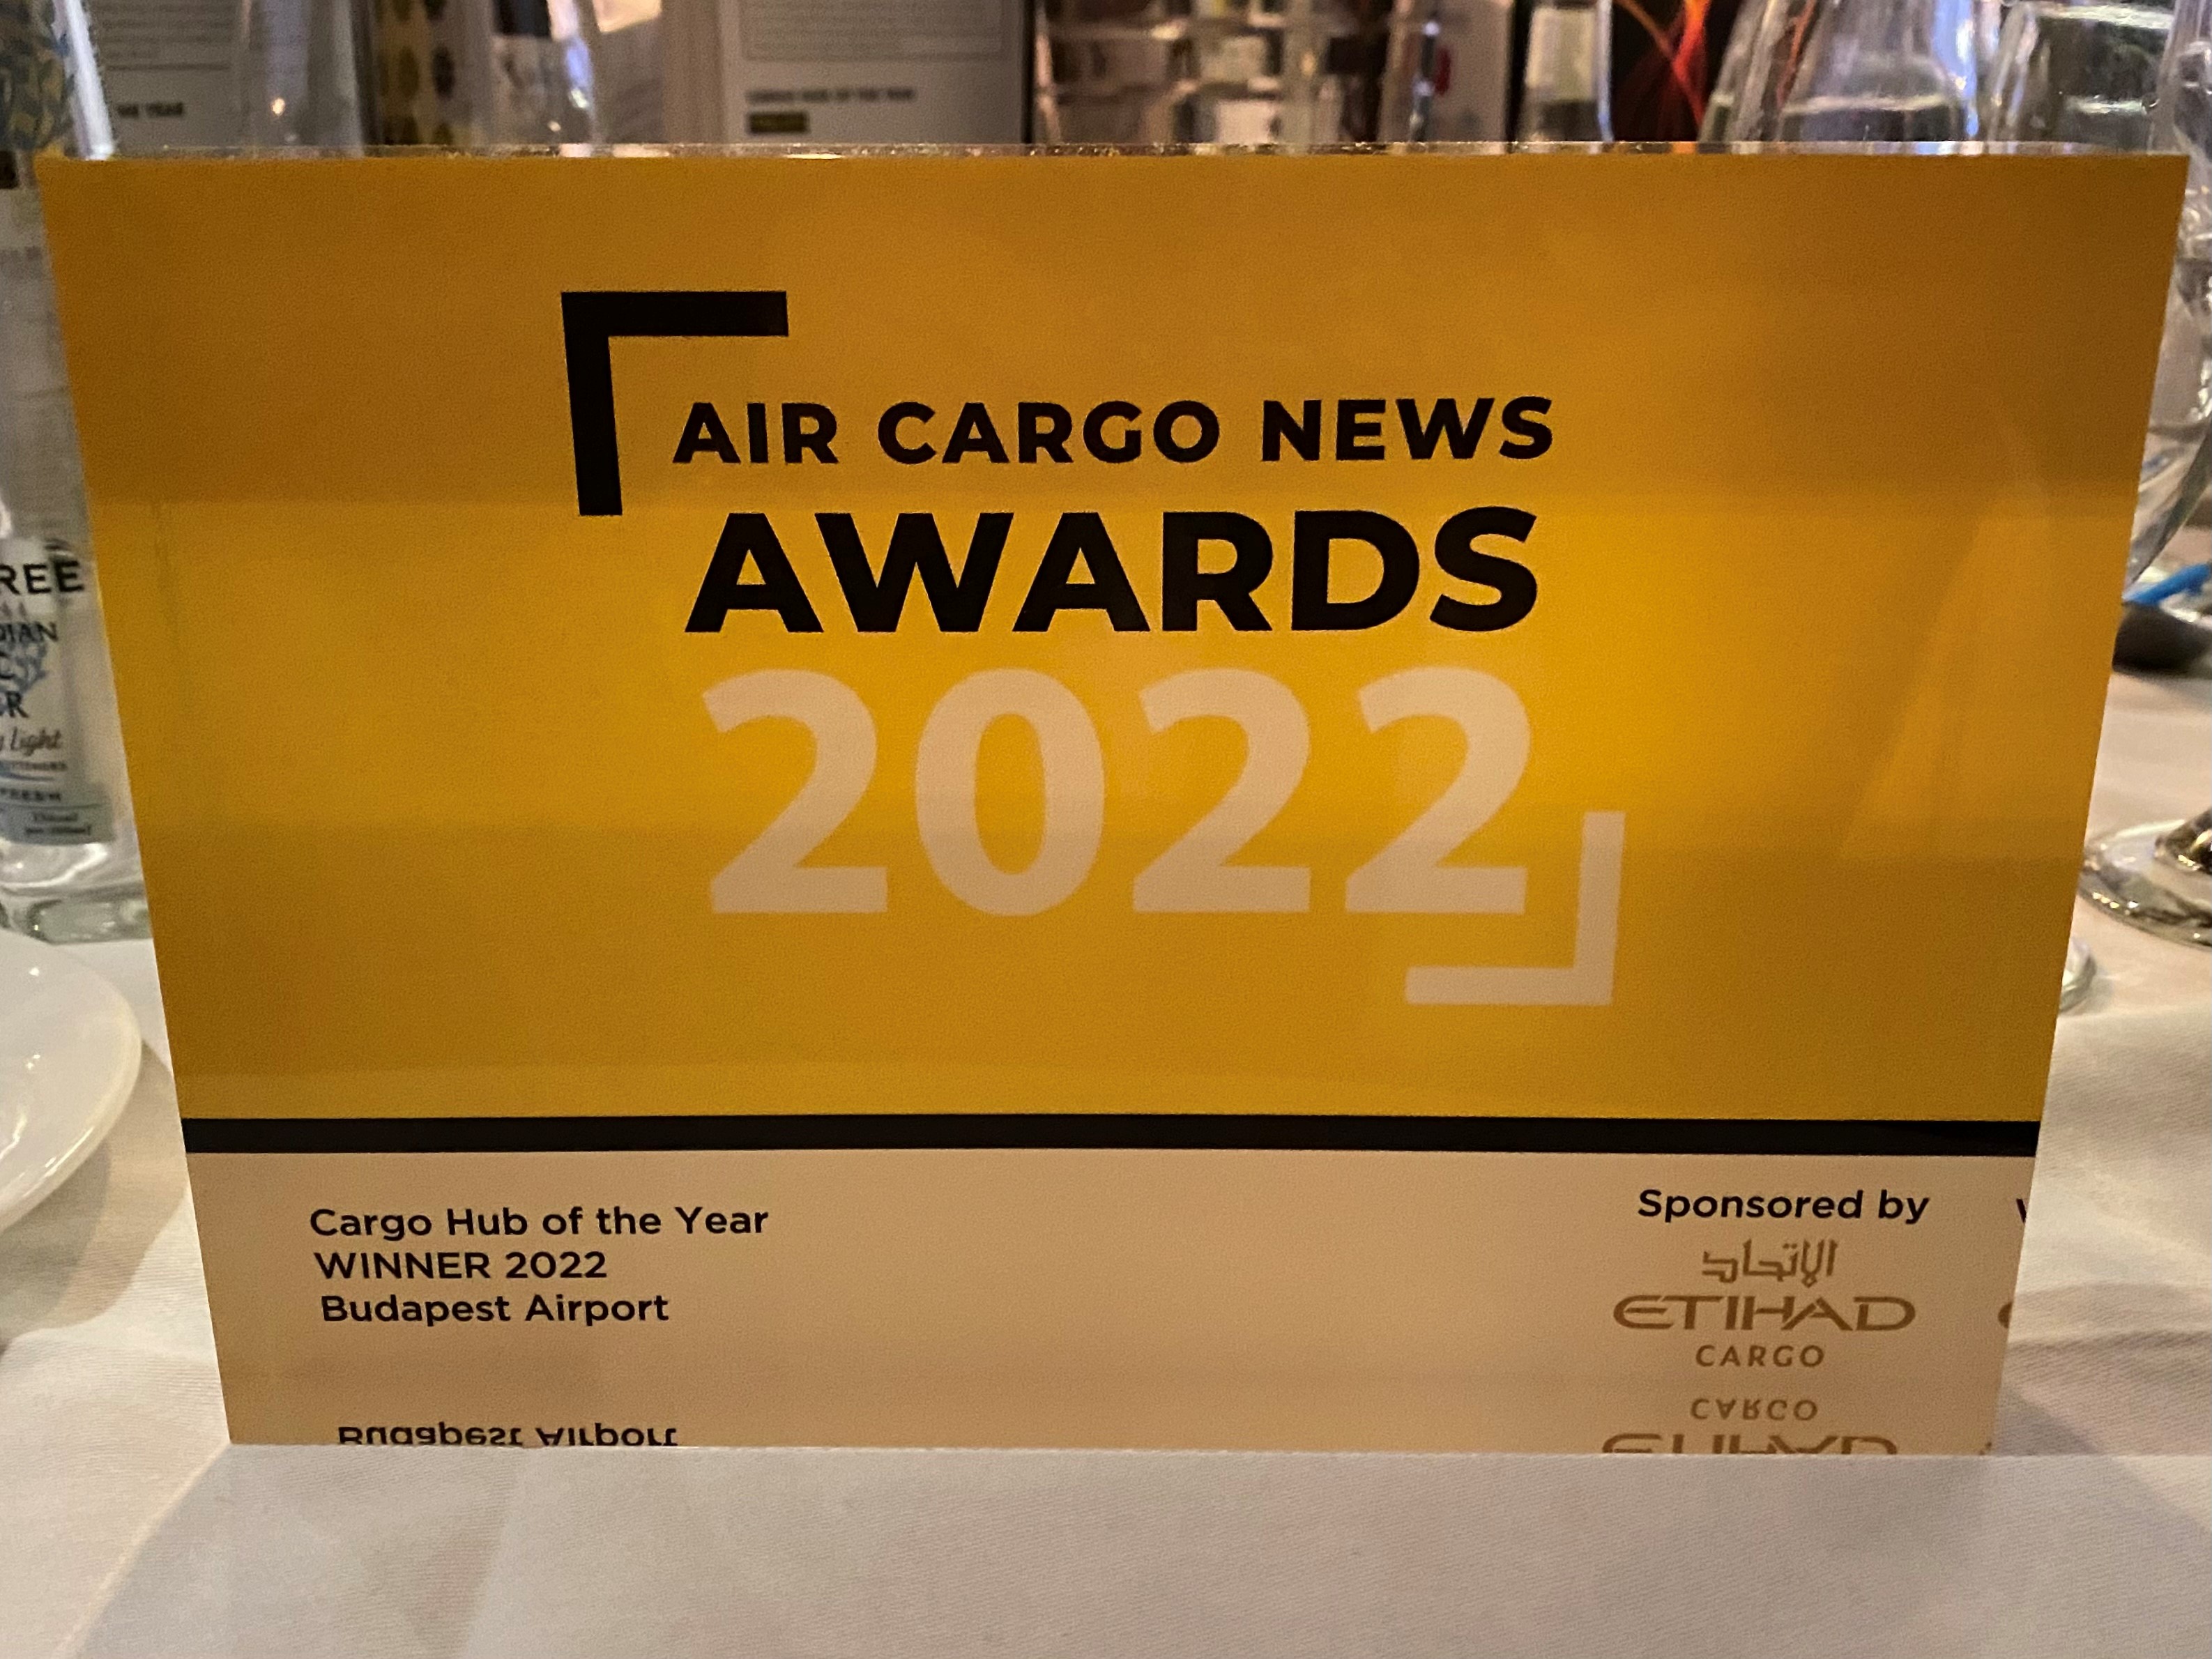 Budapest Airport Named Cargo Hub of the Year